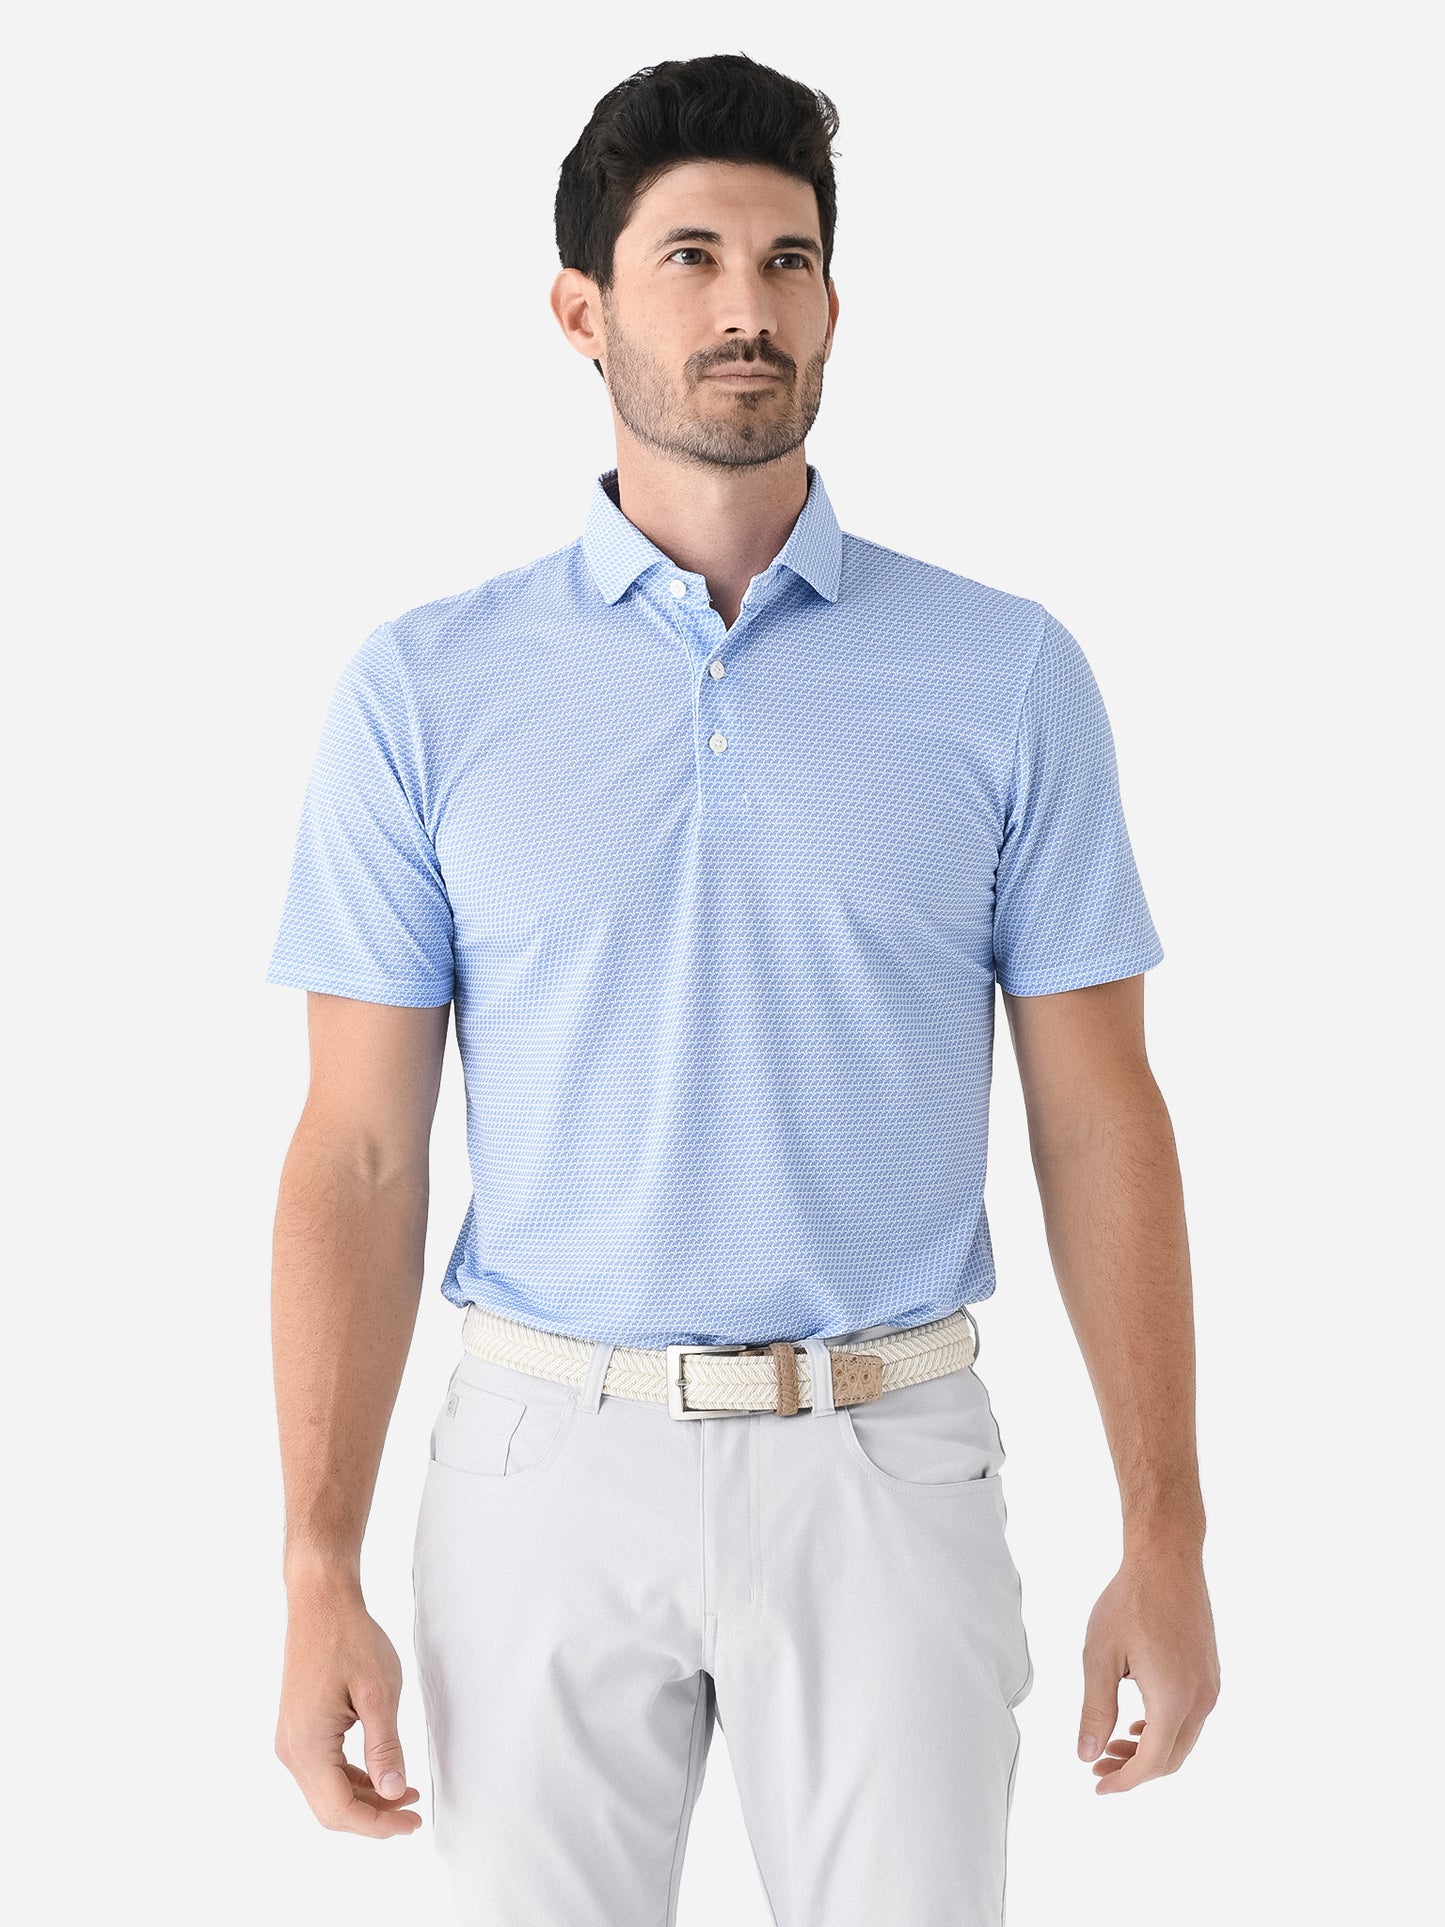 Holderness + Bourne Men's The Phelps Polo